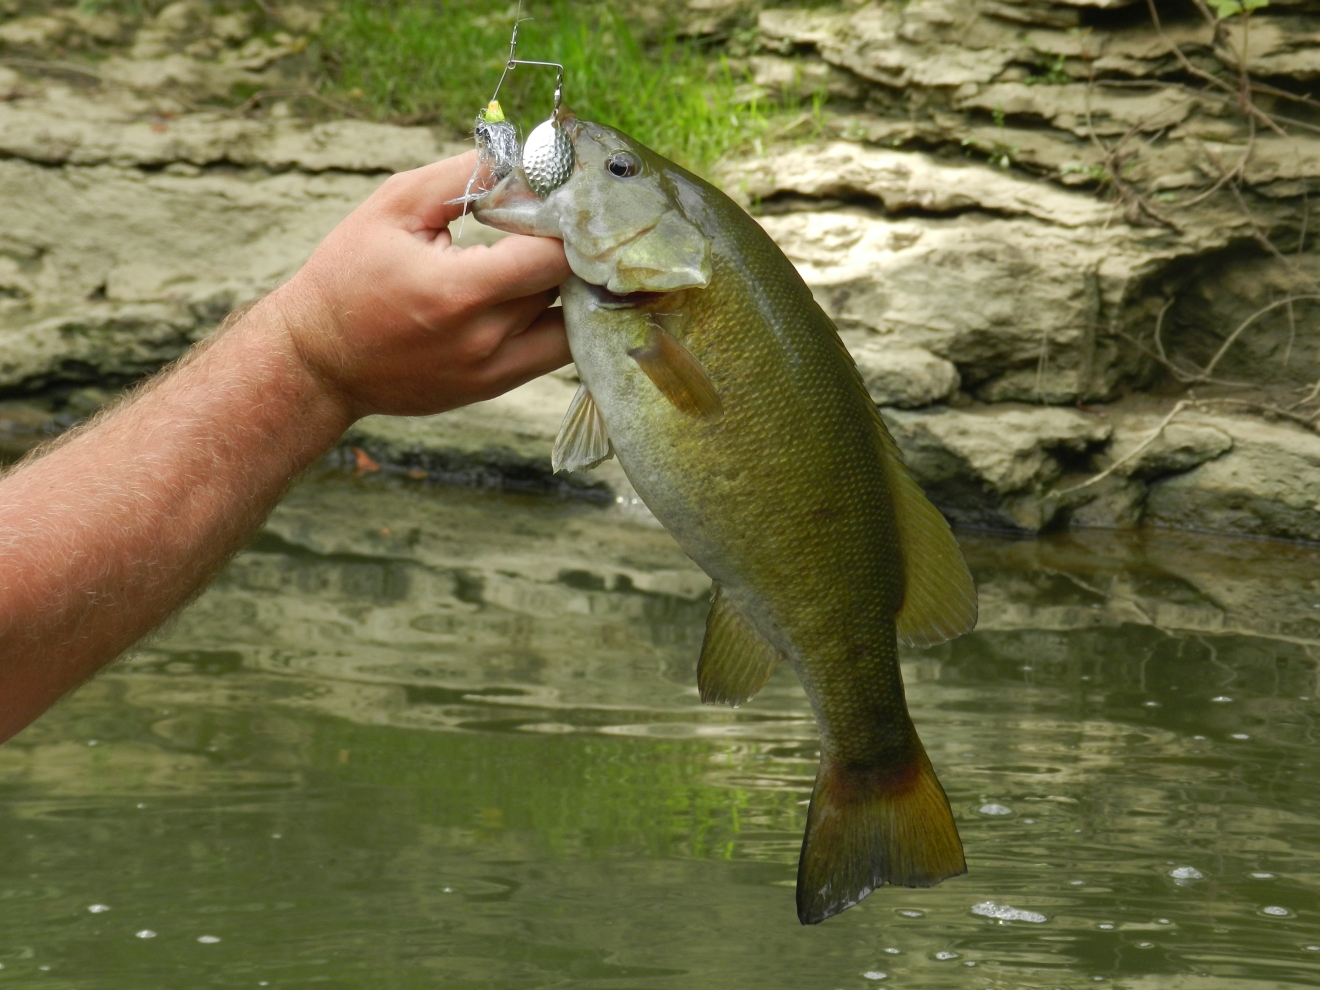 Smallmouth bass are plentiful throughout Elkhorn Creek and can be taken on a wide variety of artificial baits.